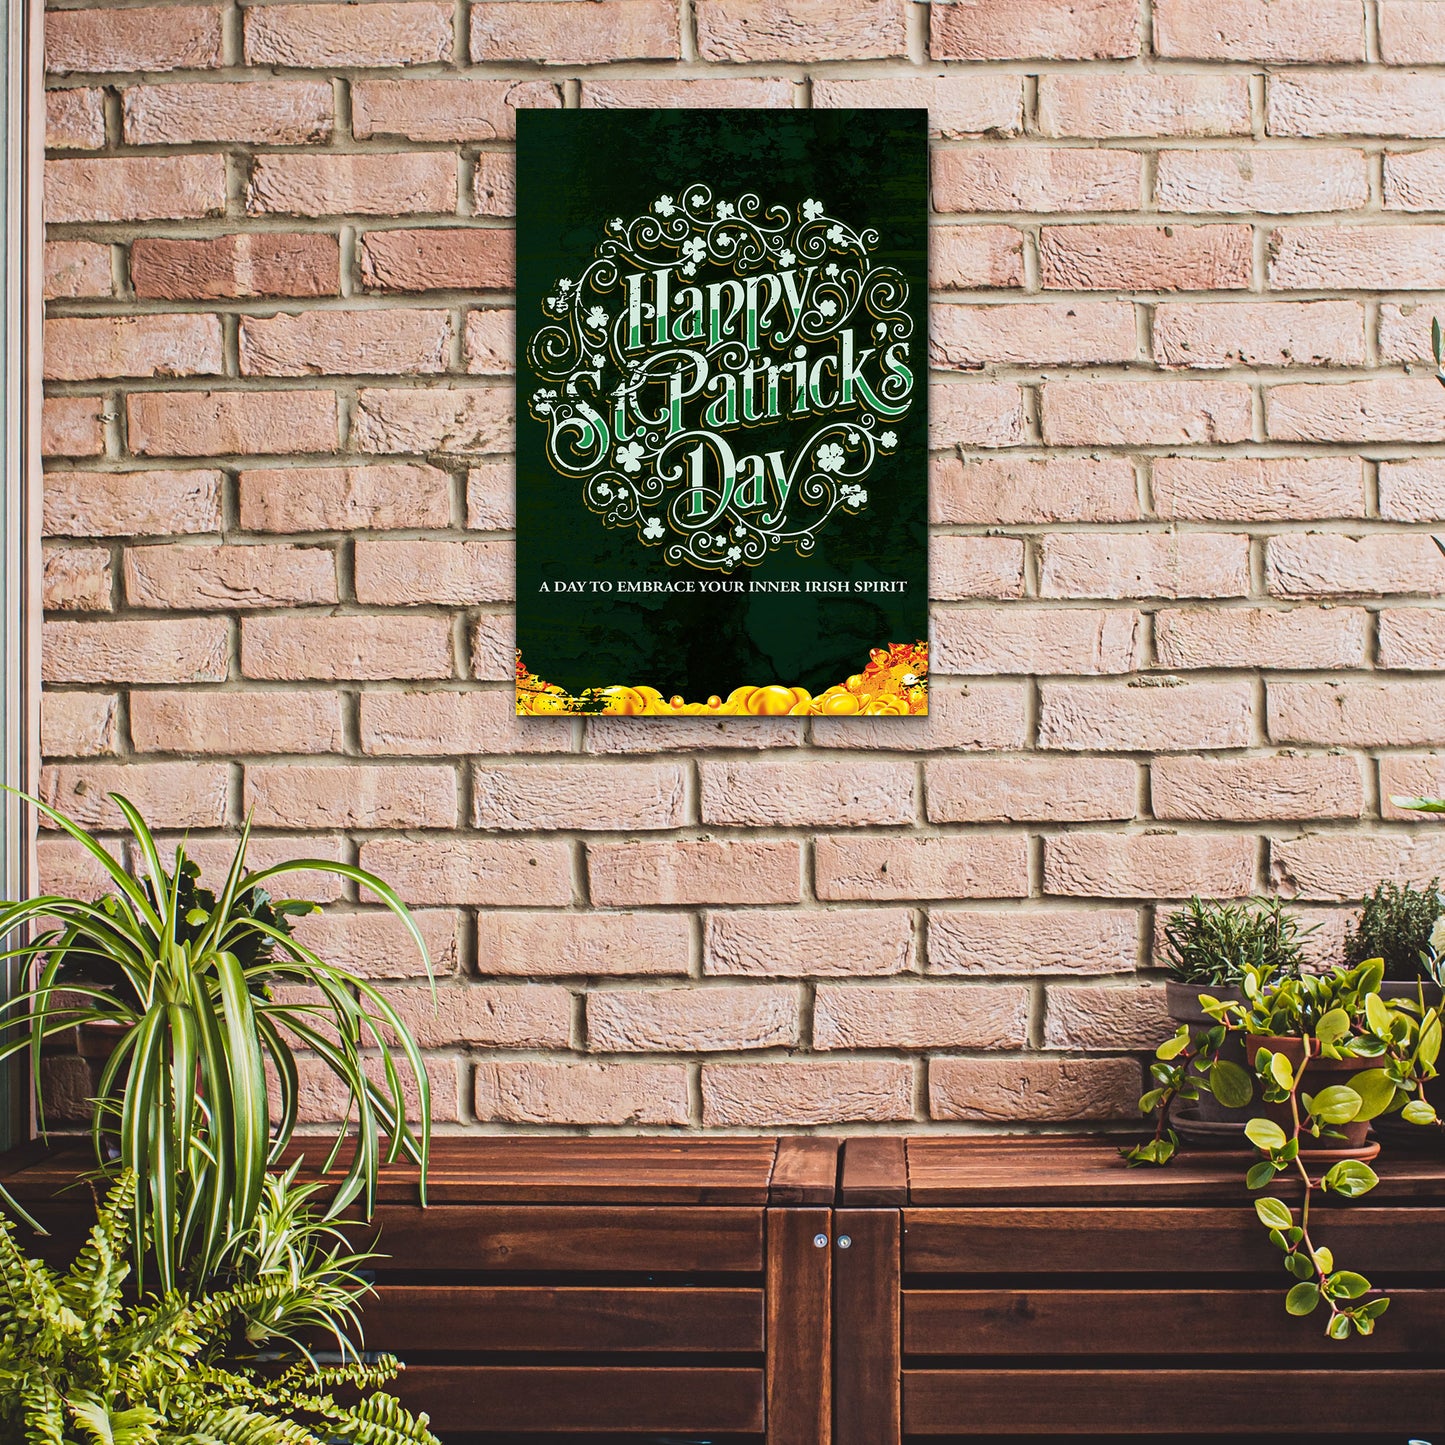 St. Patrick's Day, A Day To Embrace Your Inner Irish Spirit Sign - Image by Tailored Canvases